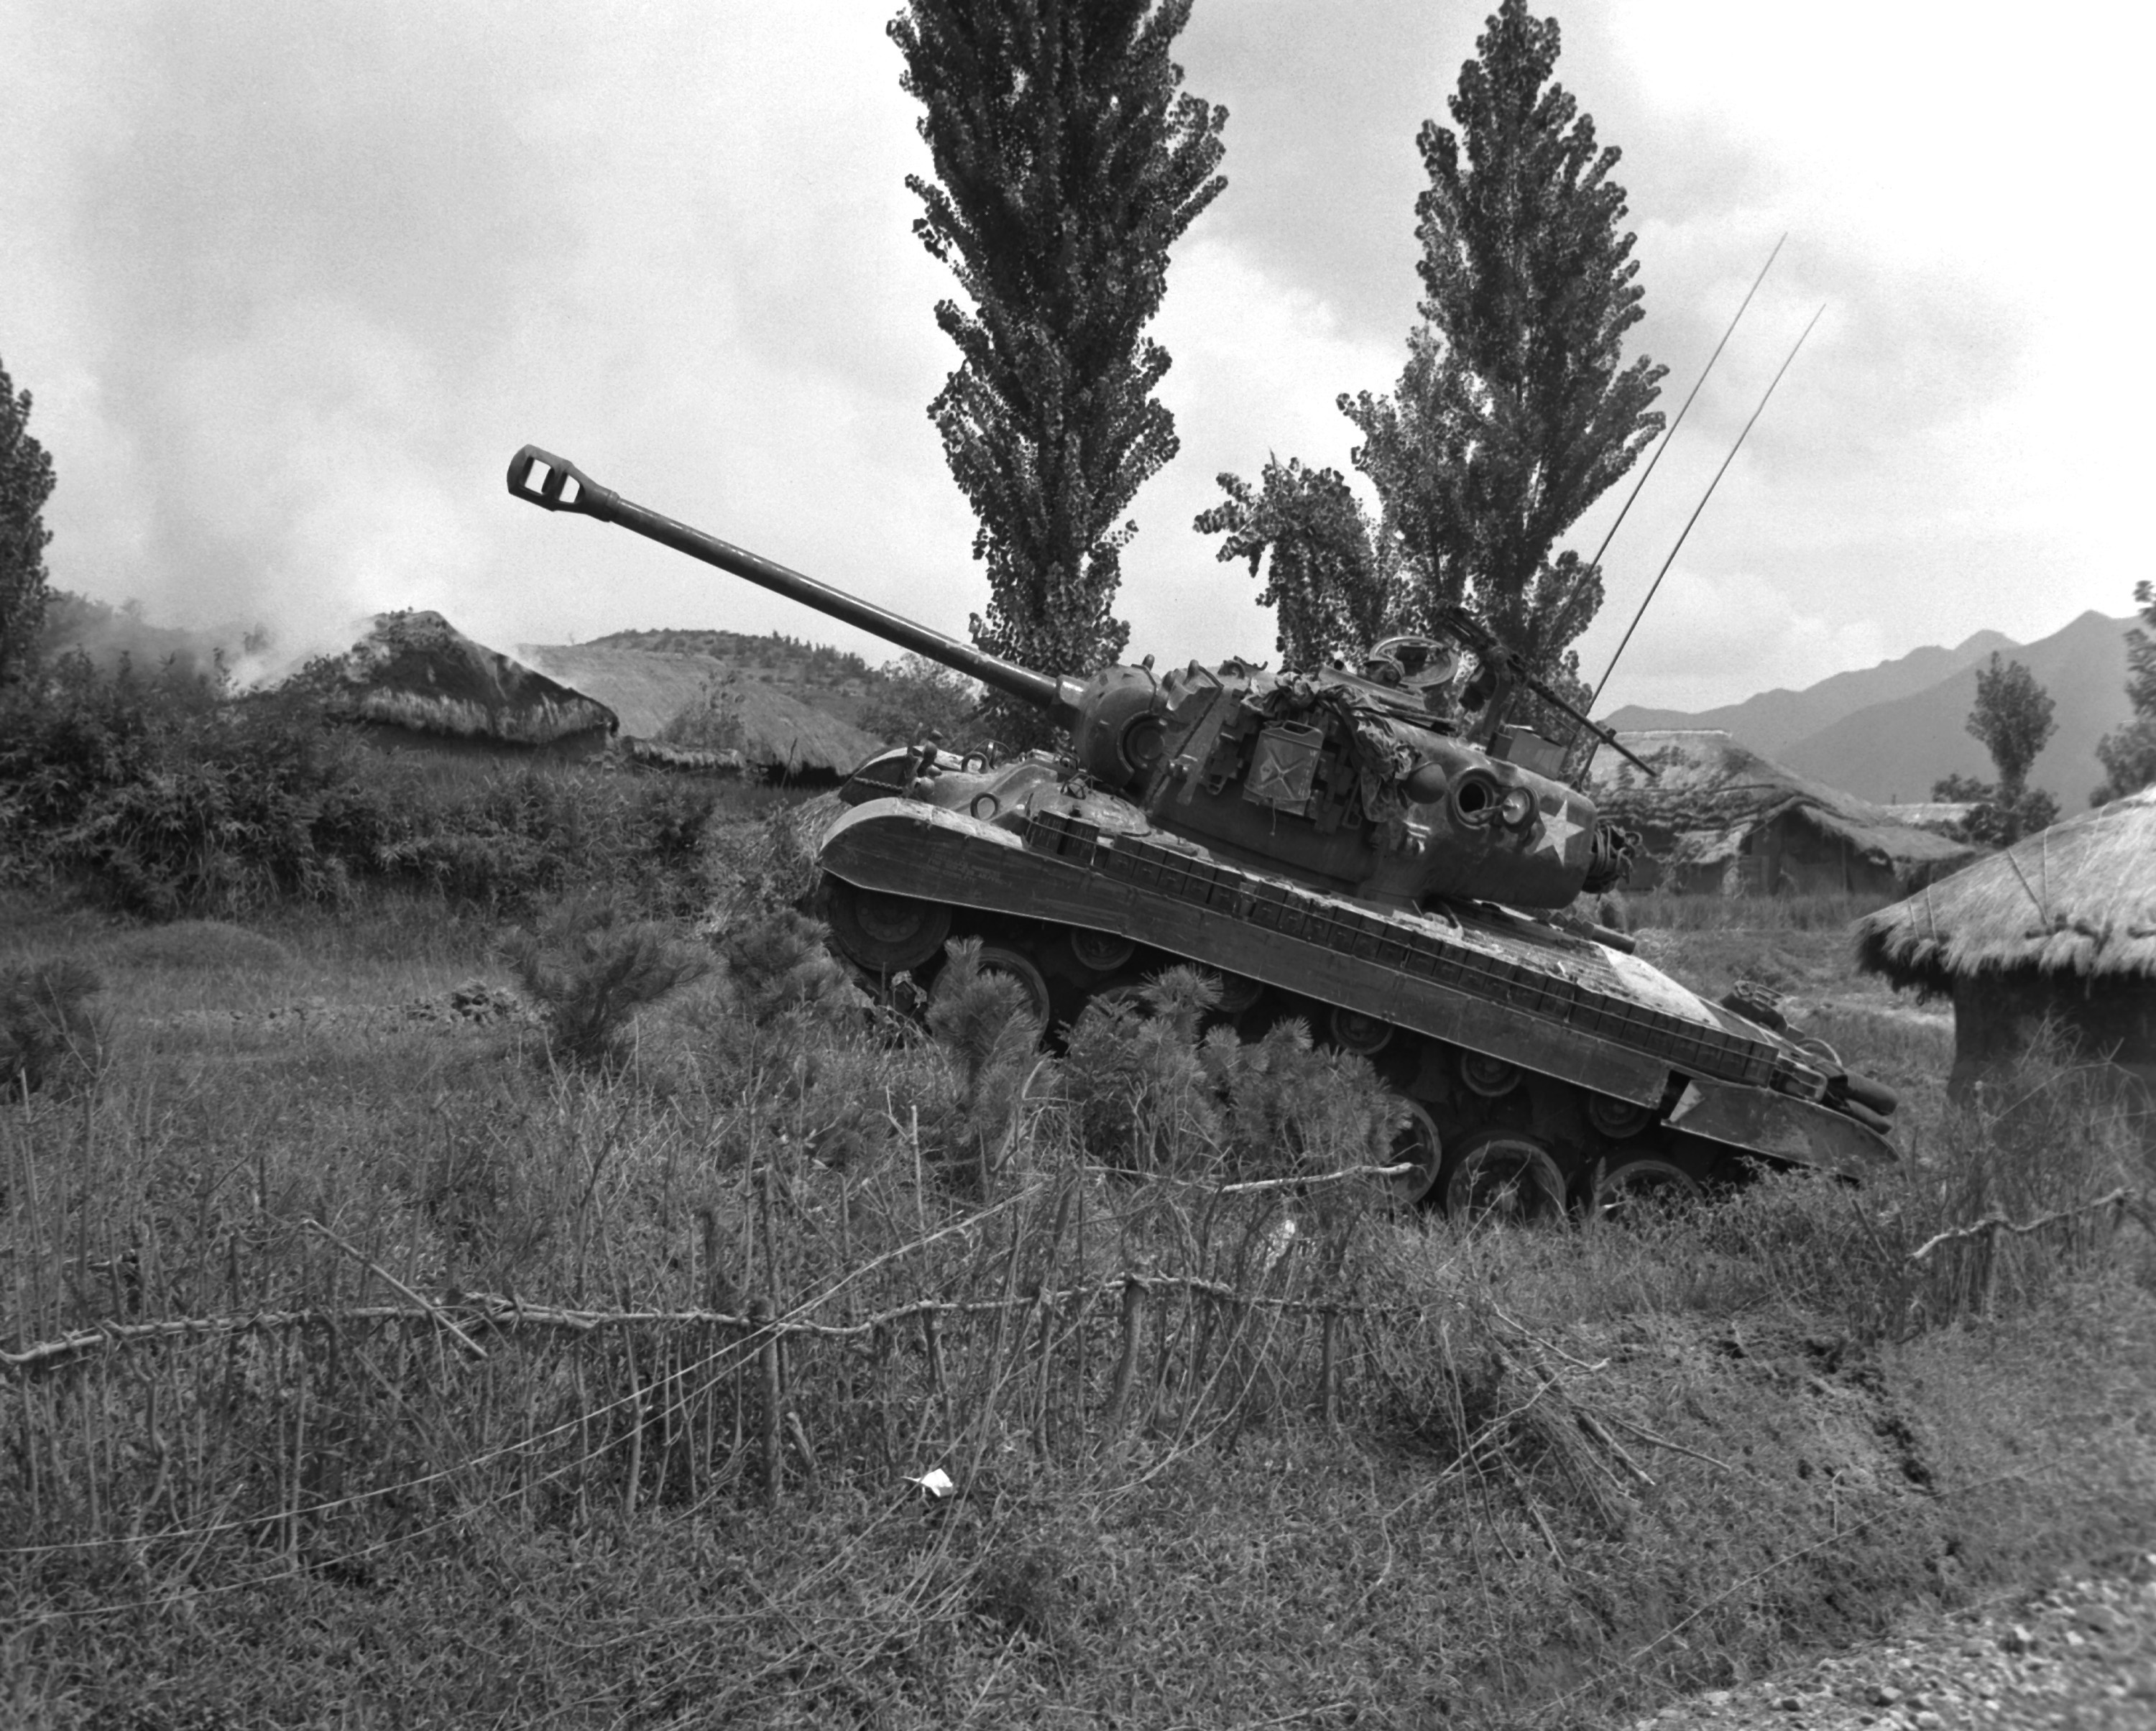 US Marine Corps Pershing tank at the edge of a village in Korea, 4 Sep 1950